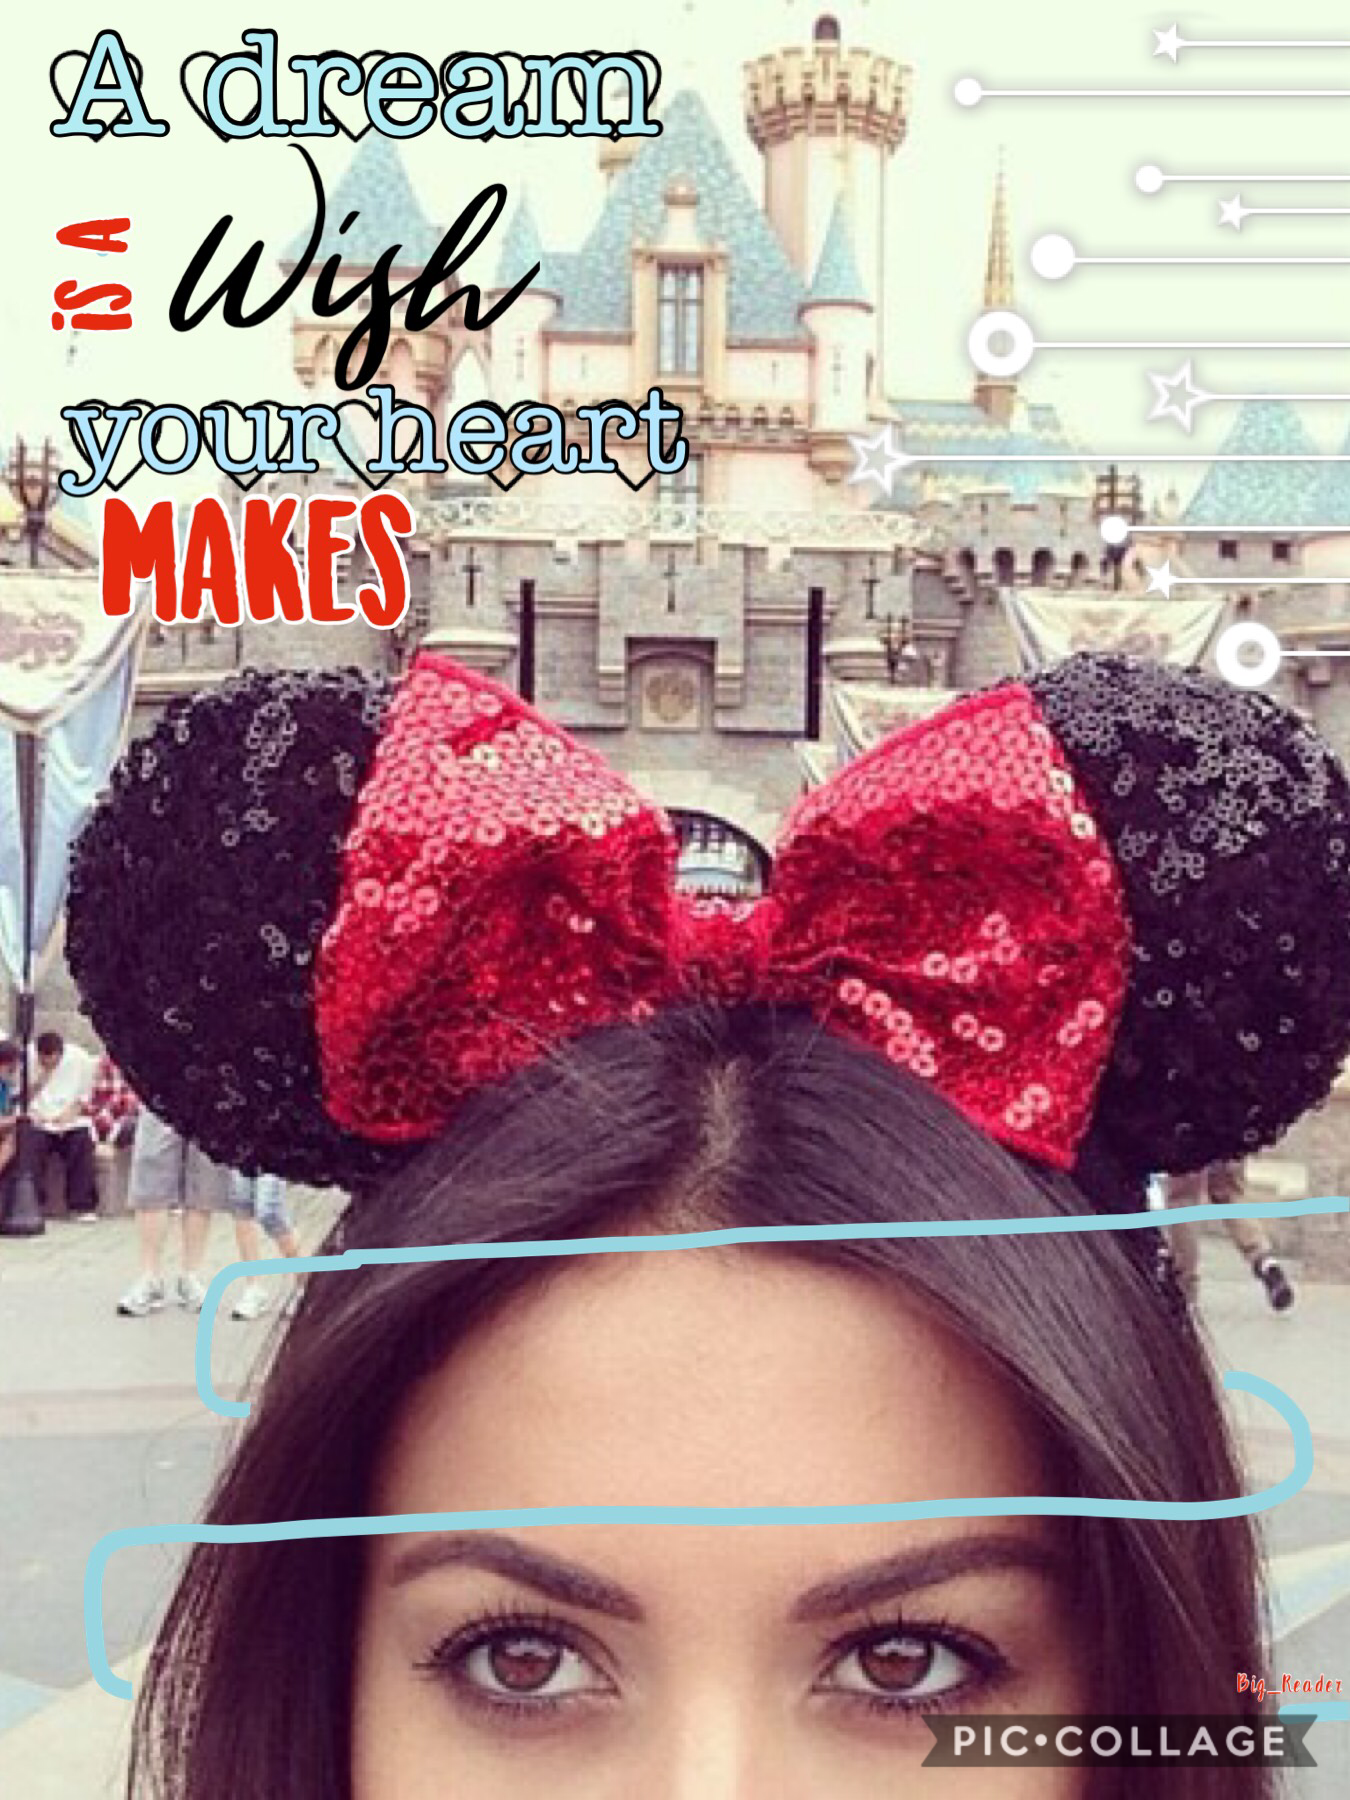 Last Disney themed collage for a whisle😢this was a really fun and great theme! 🤗 Who is excited for the live action Aladdin? I am!! ✨✨ QOTD: wear Minnie ears or a Goofy hat? AOTD: Minnie ears!😊 have a great day, y’all! 💕love y’all!